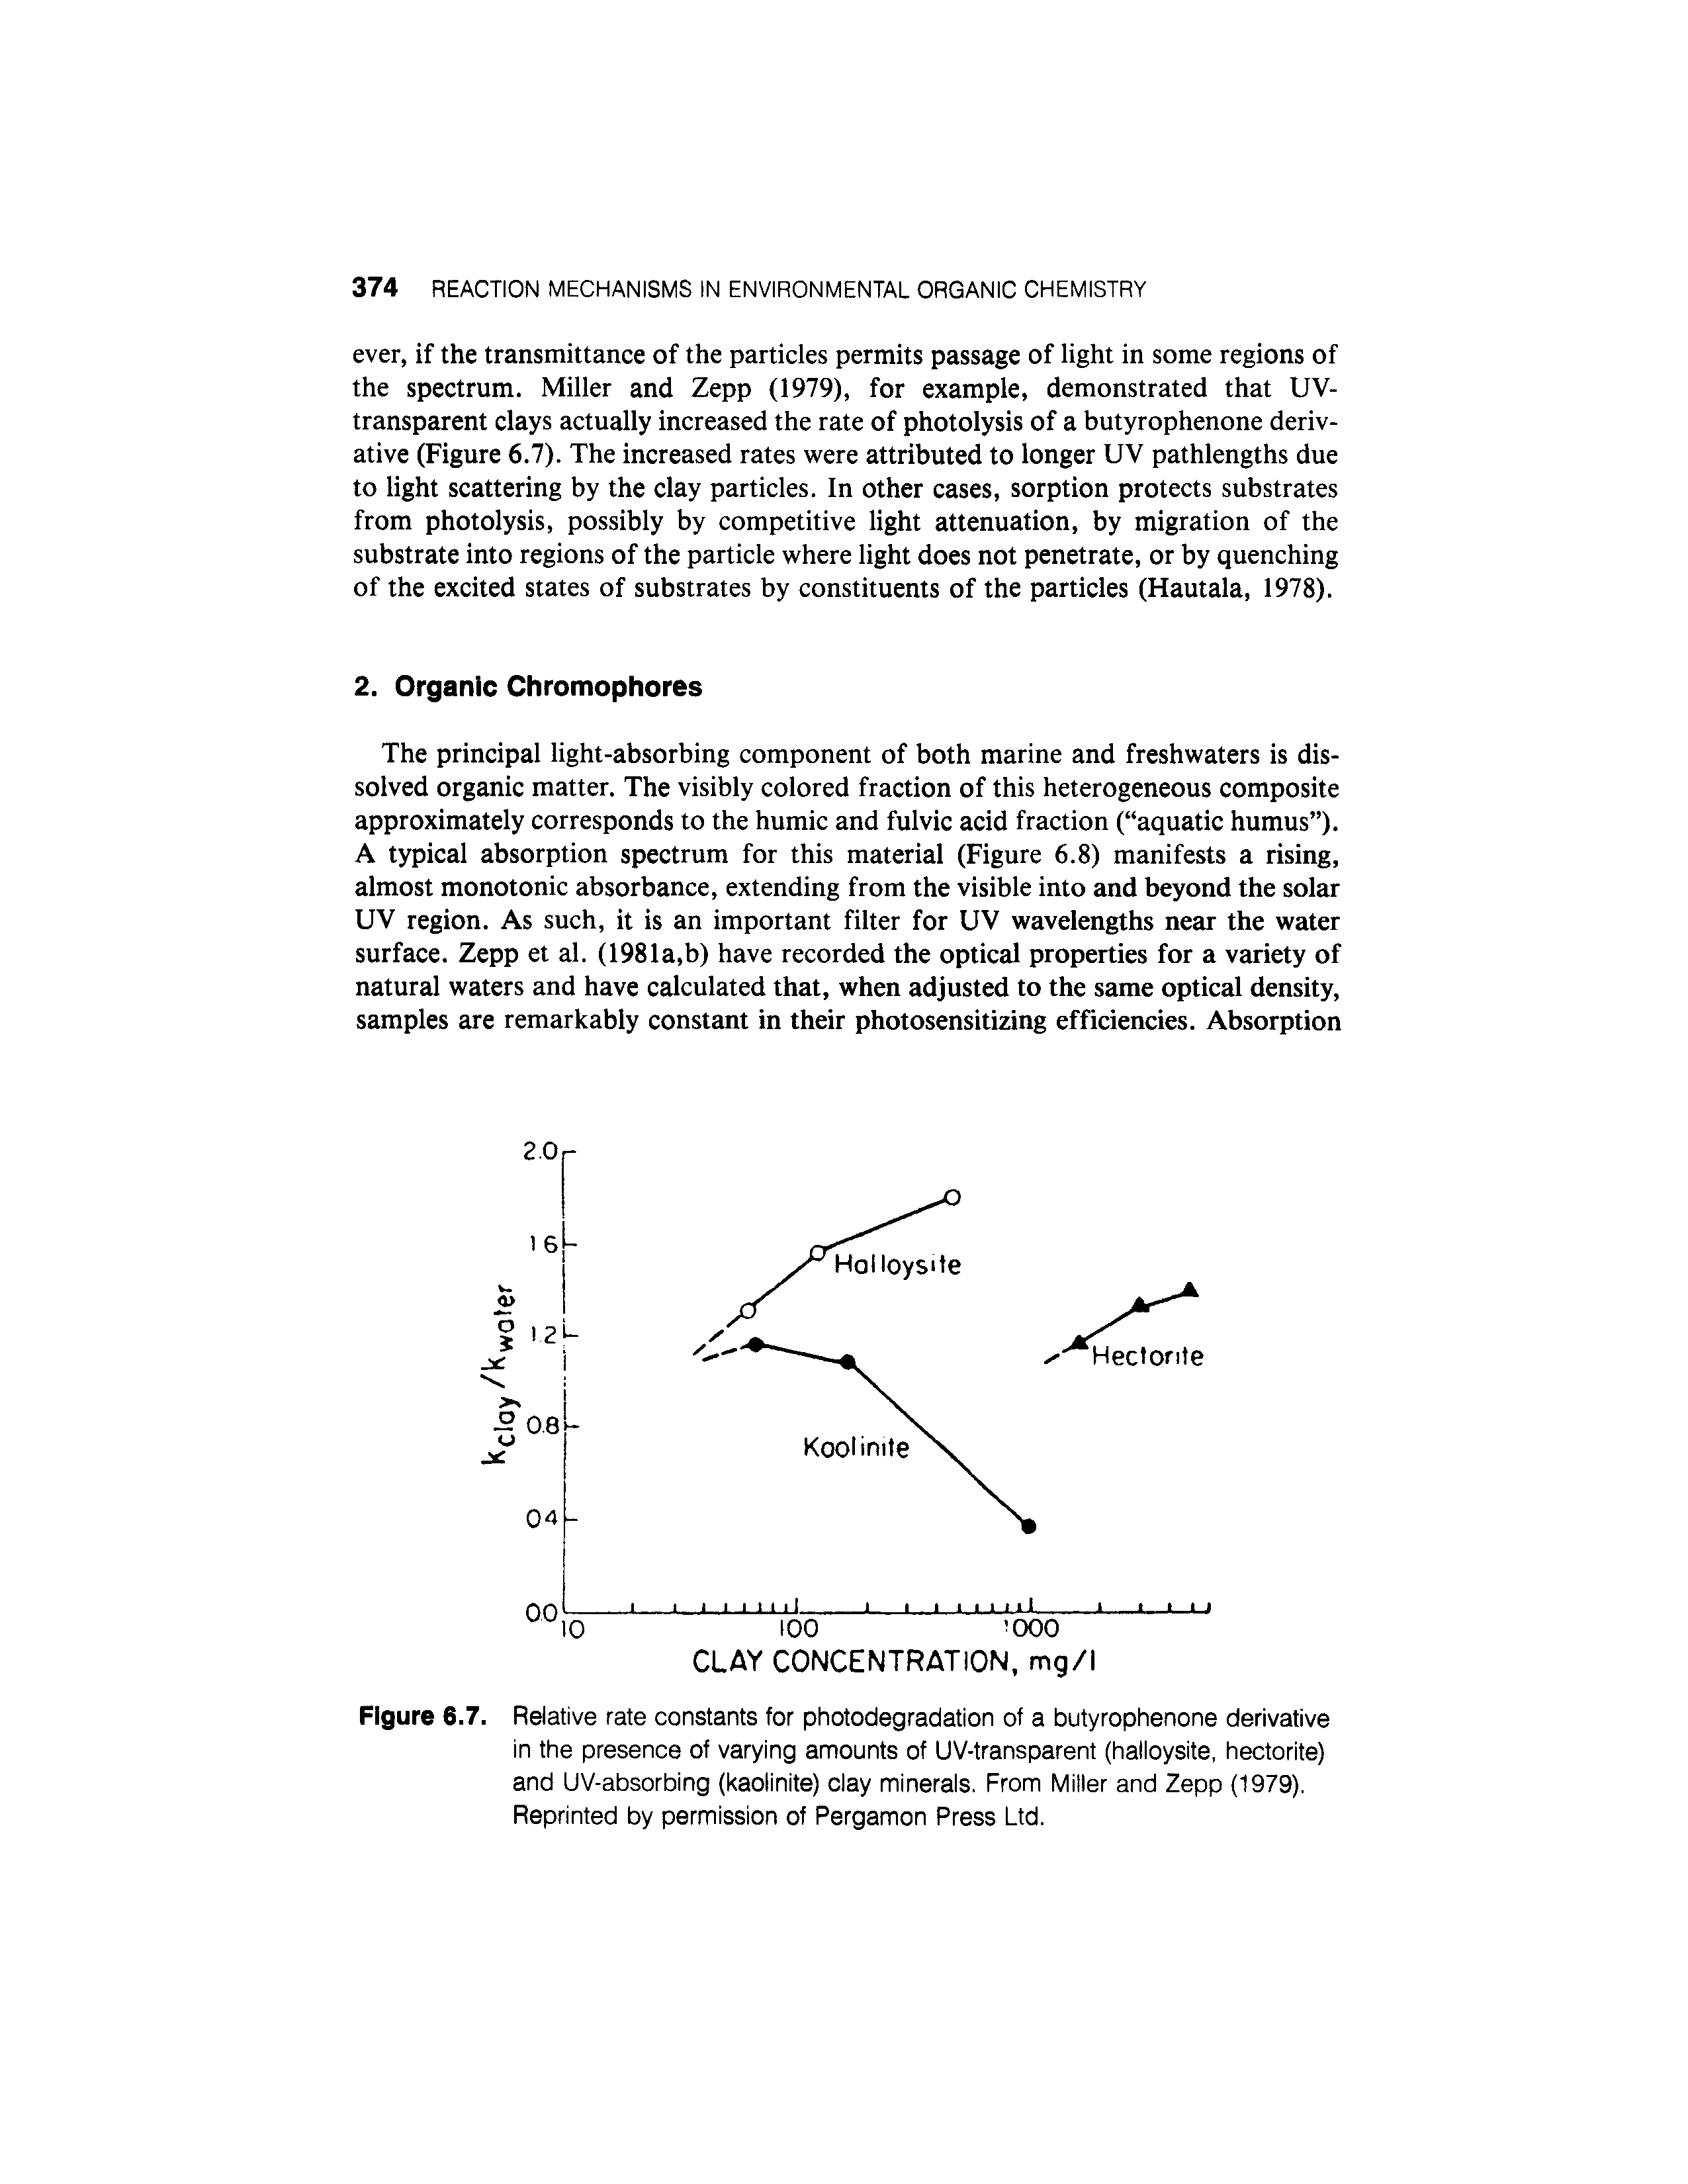 Figure 6.7. Relative rate constants for photodegradation of a butyrophenone derivative in the presence of varying amounts of UV-transparent (halloysite, hectorite) and UV-absorbing (kaolinite) clay minerals. From Miller and Zepp (1979). Reprinted by permission of Pergamon Press Ltd.